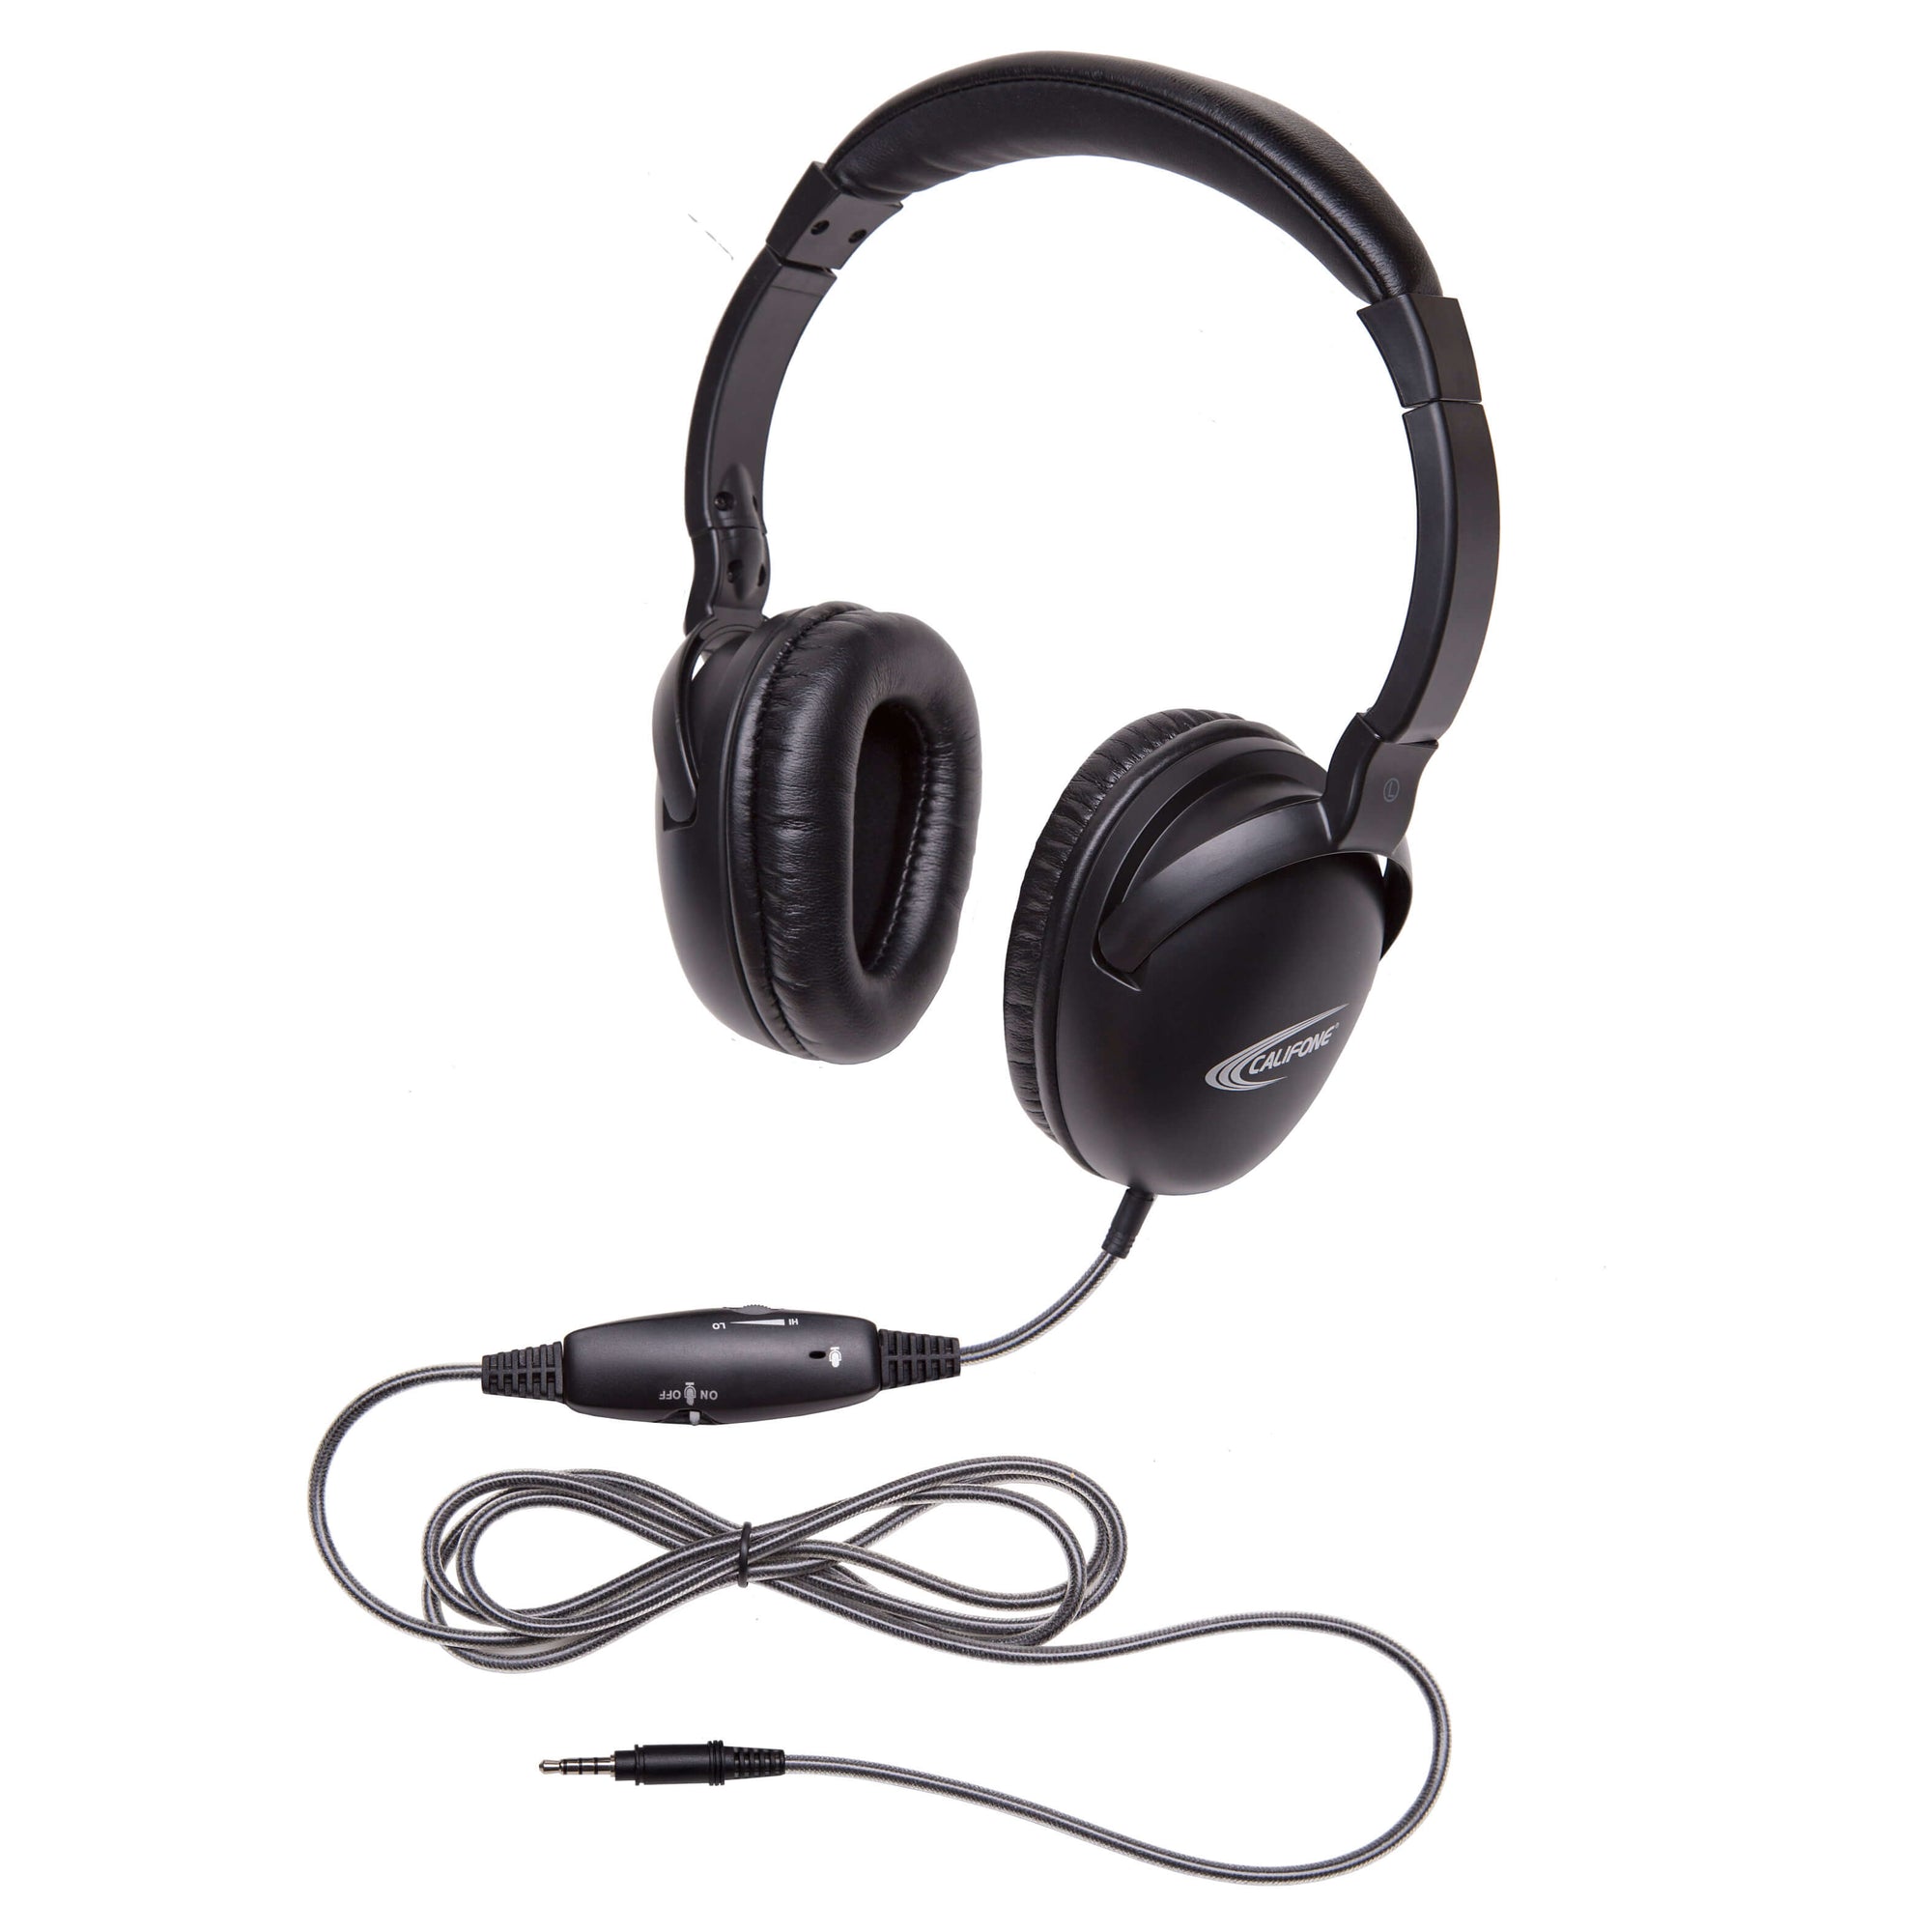 Califone NeoTech Plus Headset with In-line Mic - Learning Headphones